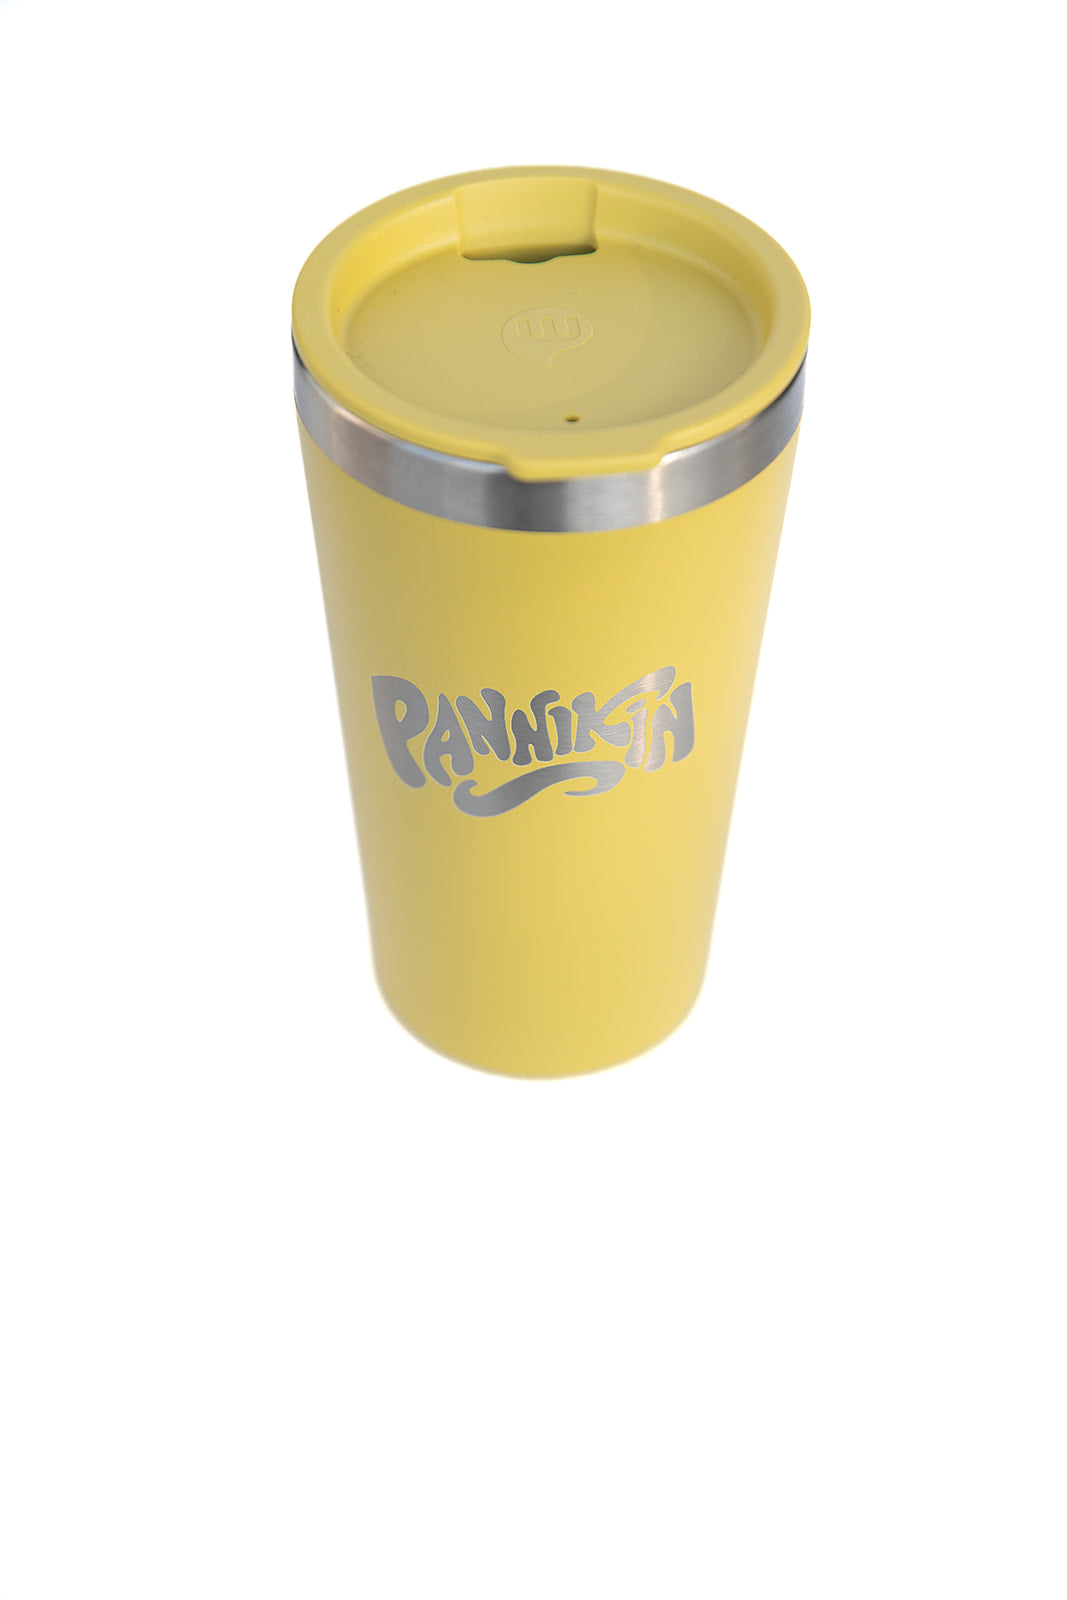 Pannikin Ceramic Lined Insulated Travel Tumbler 10oz, 2 Color Choices